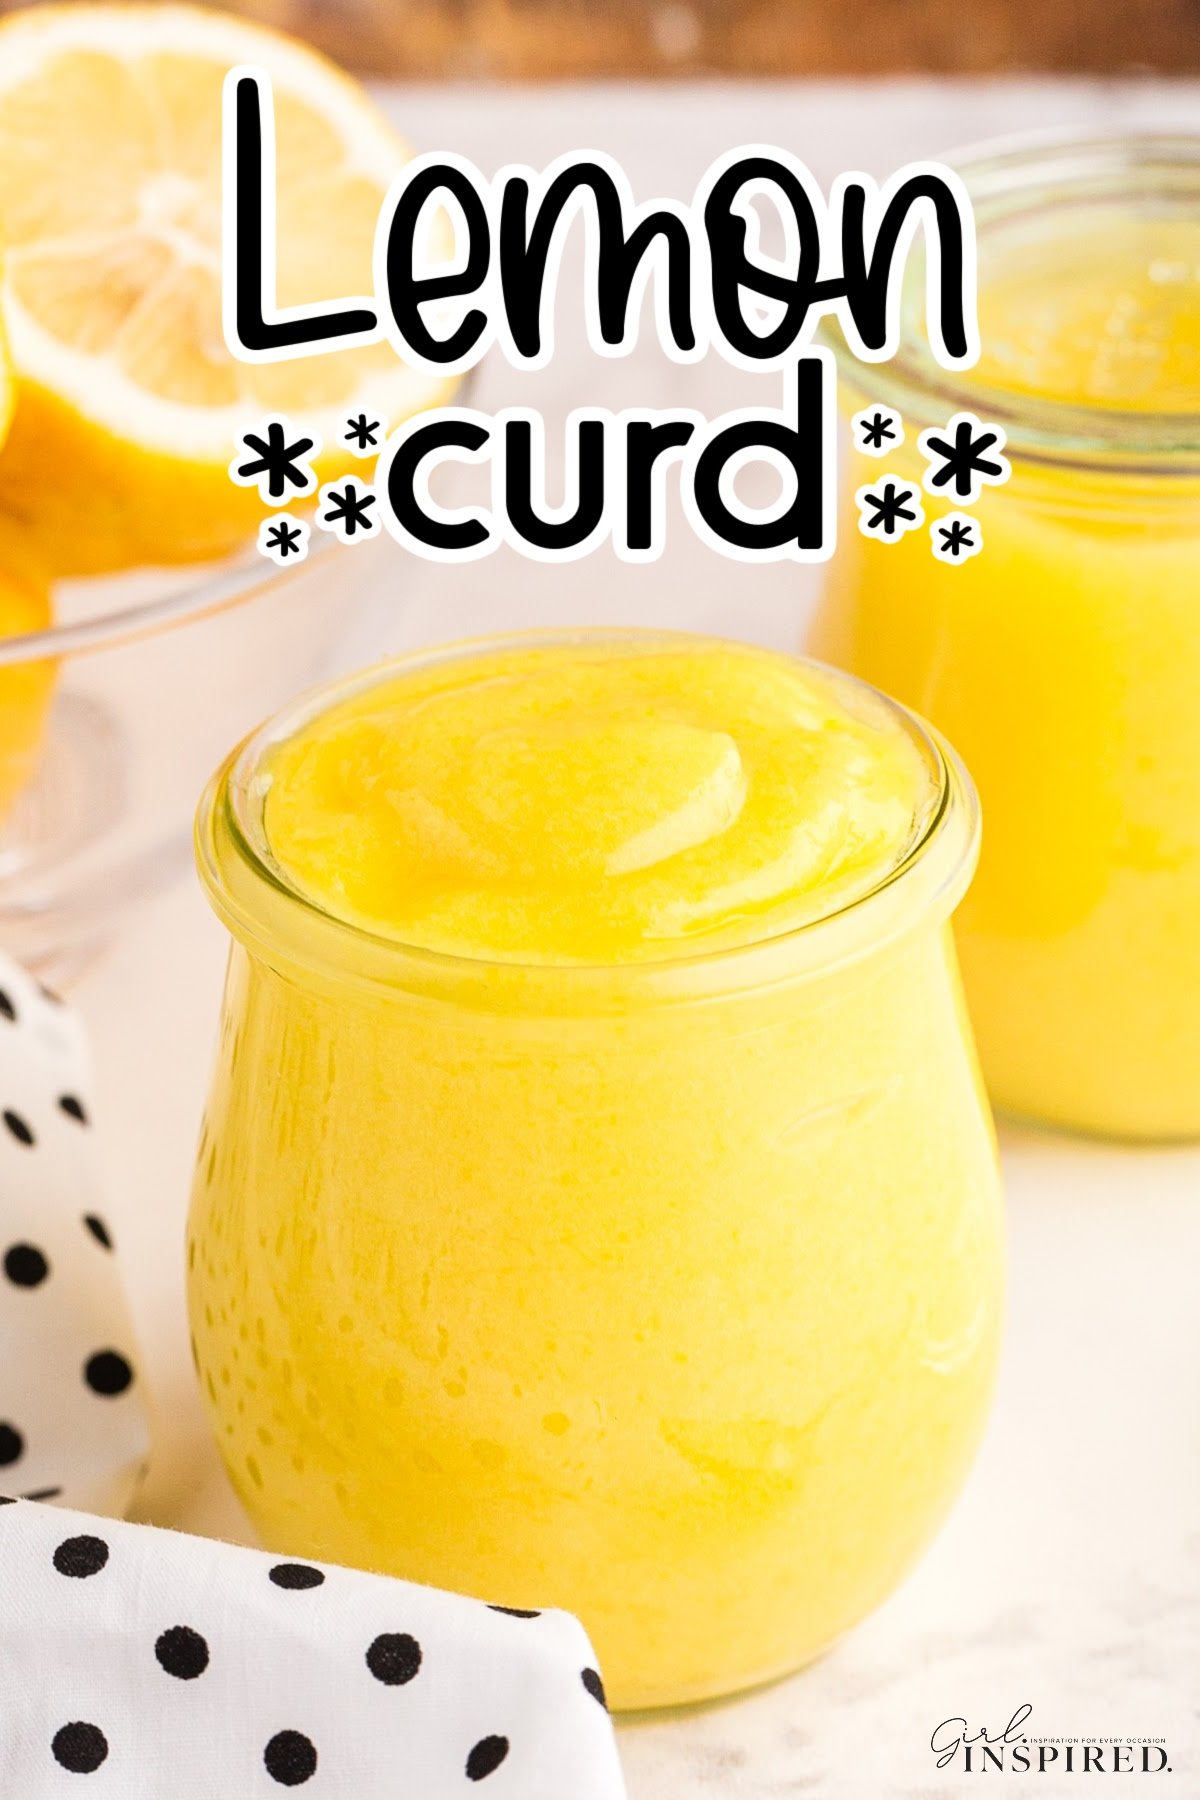 A jar filled with Creamy Lemon Curd with text overlay.